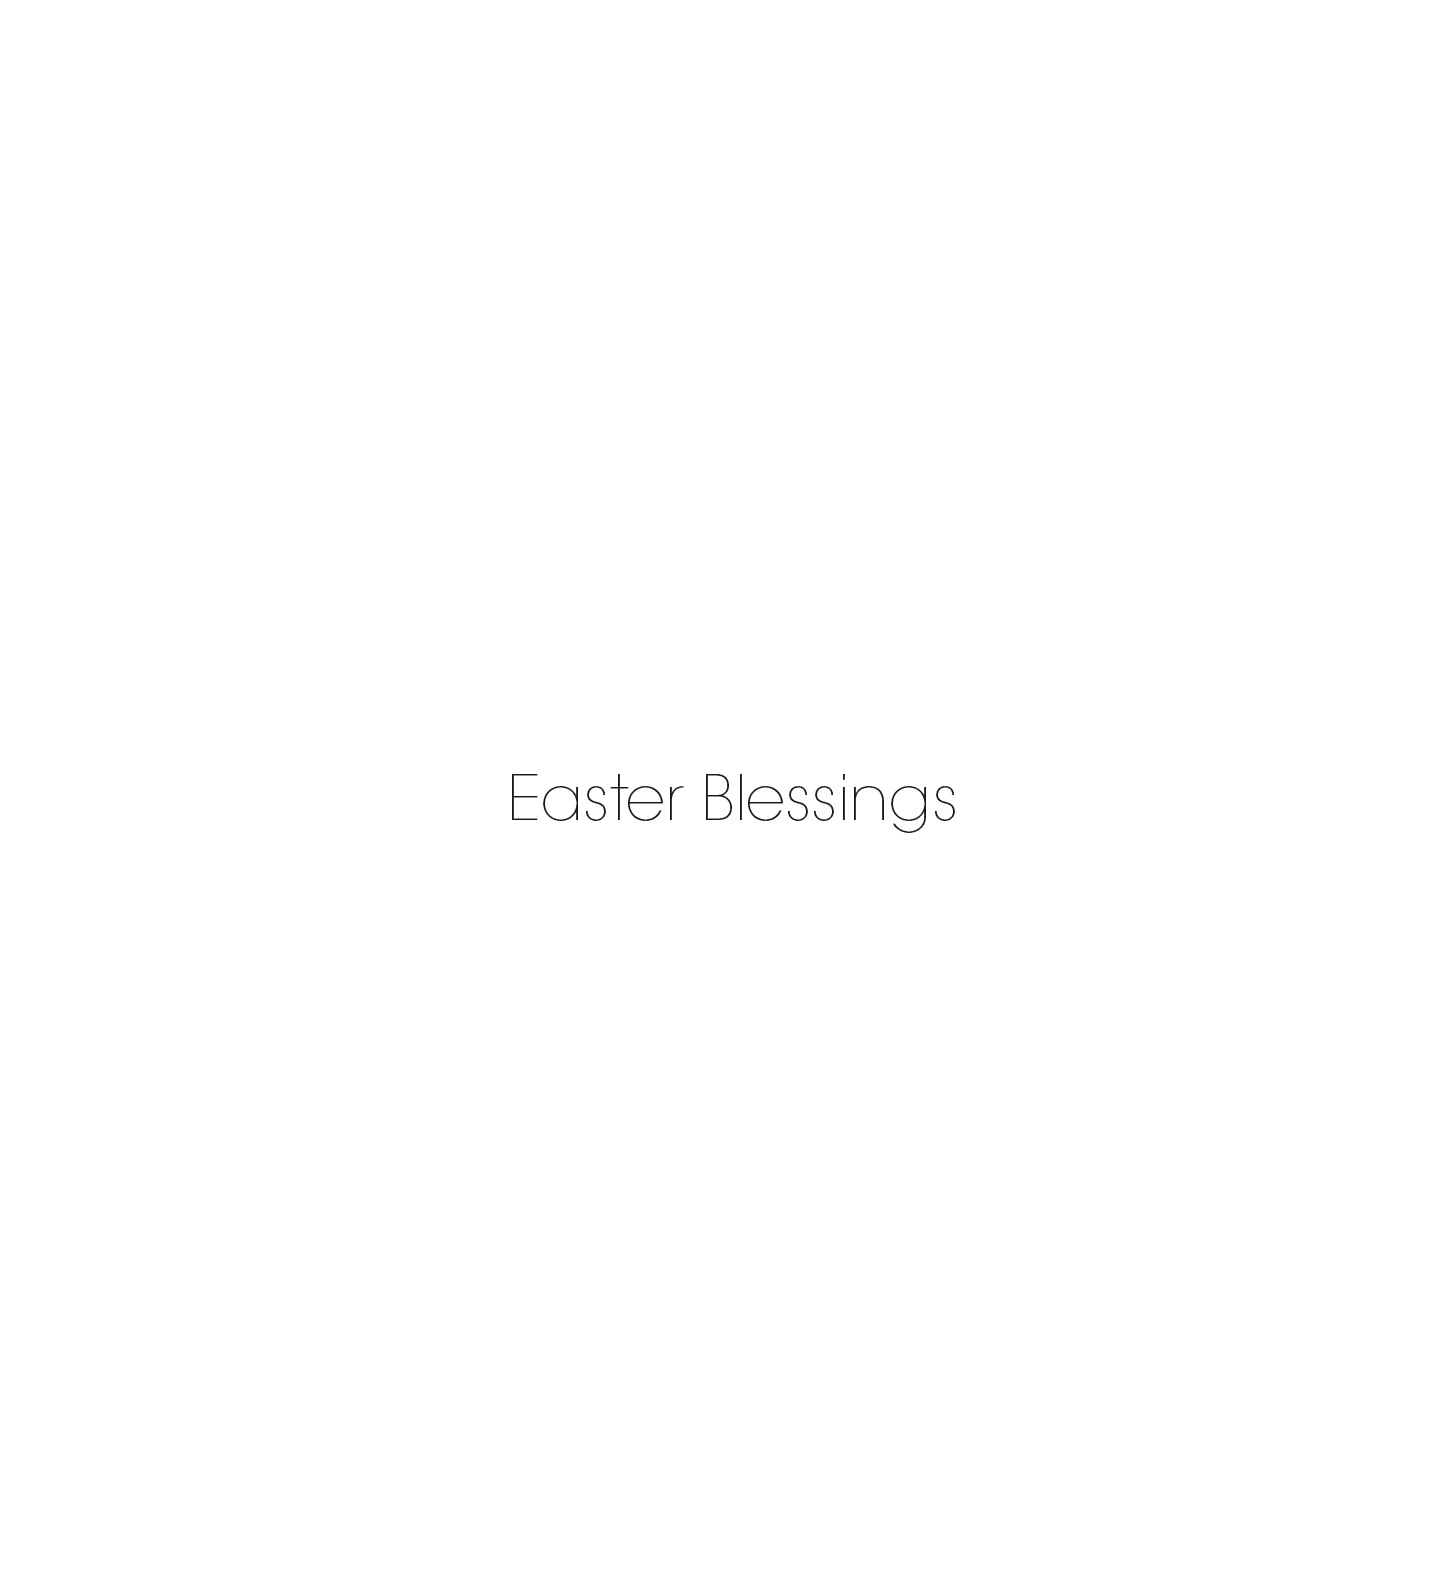 Pack of 5 Easter Blessing Floral Easter Cards